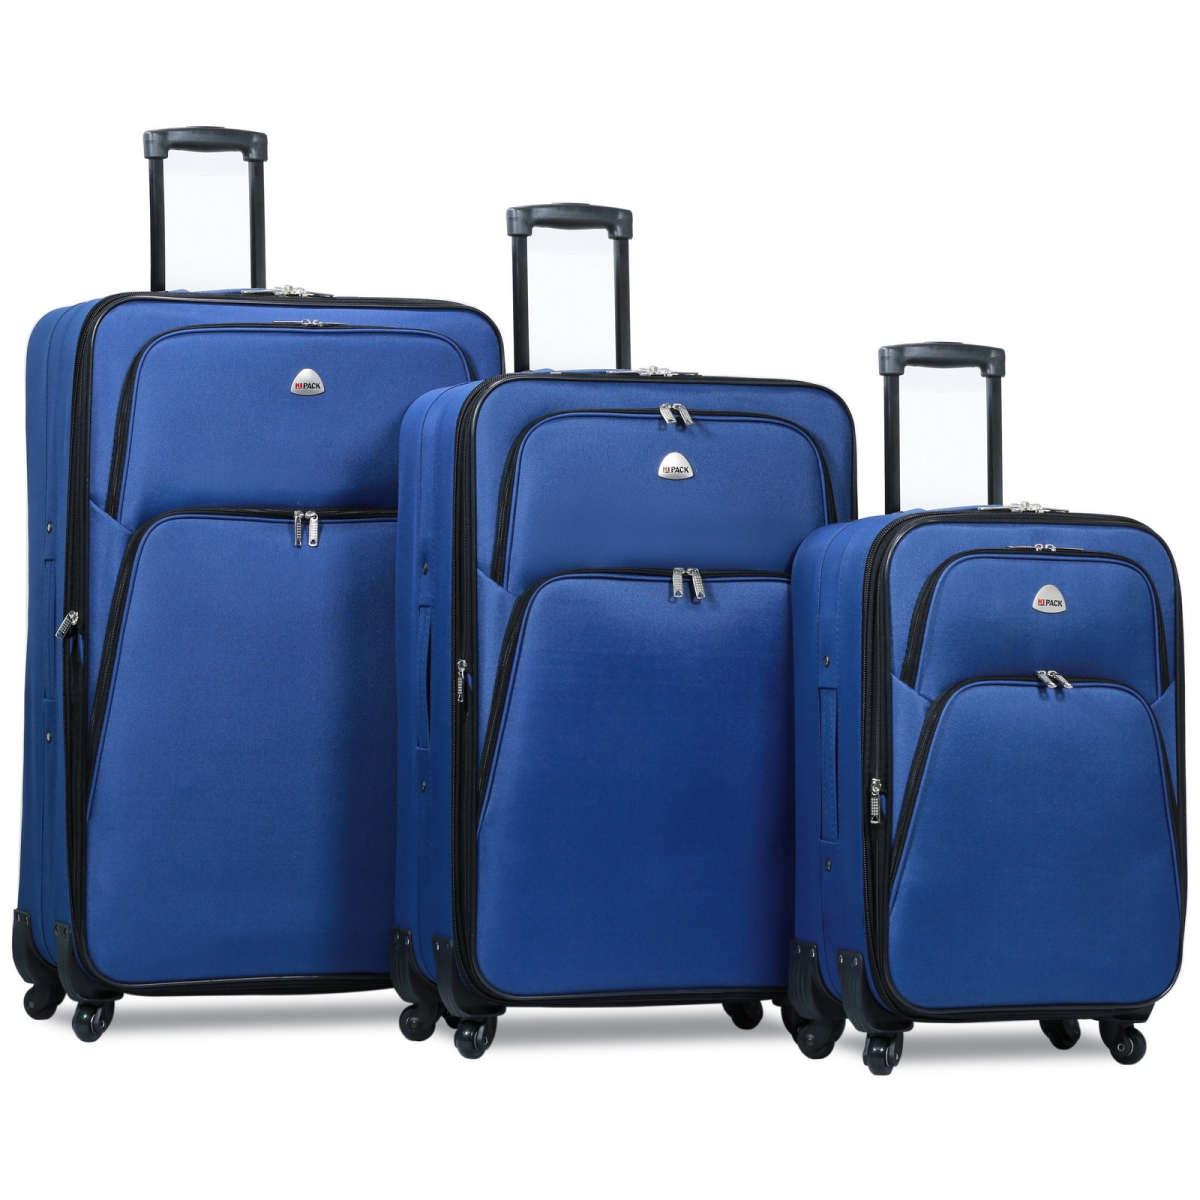 25hy-305-navy Spinner Expandable Luggage Set - Navy, 3 Piece